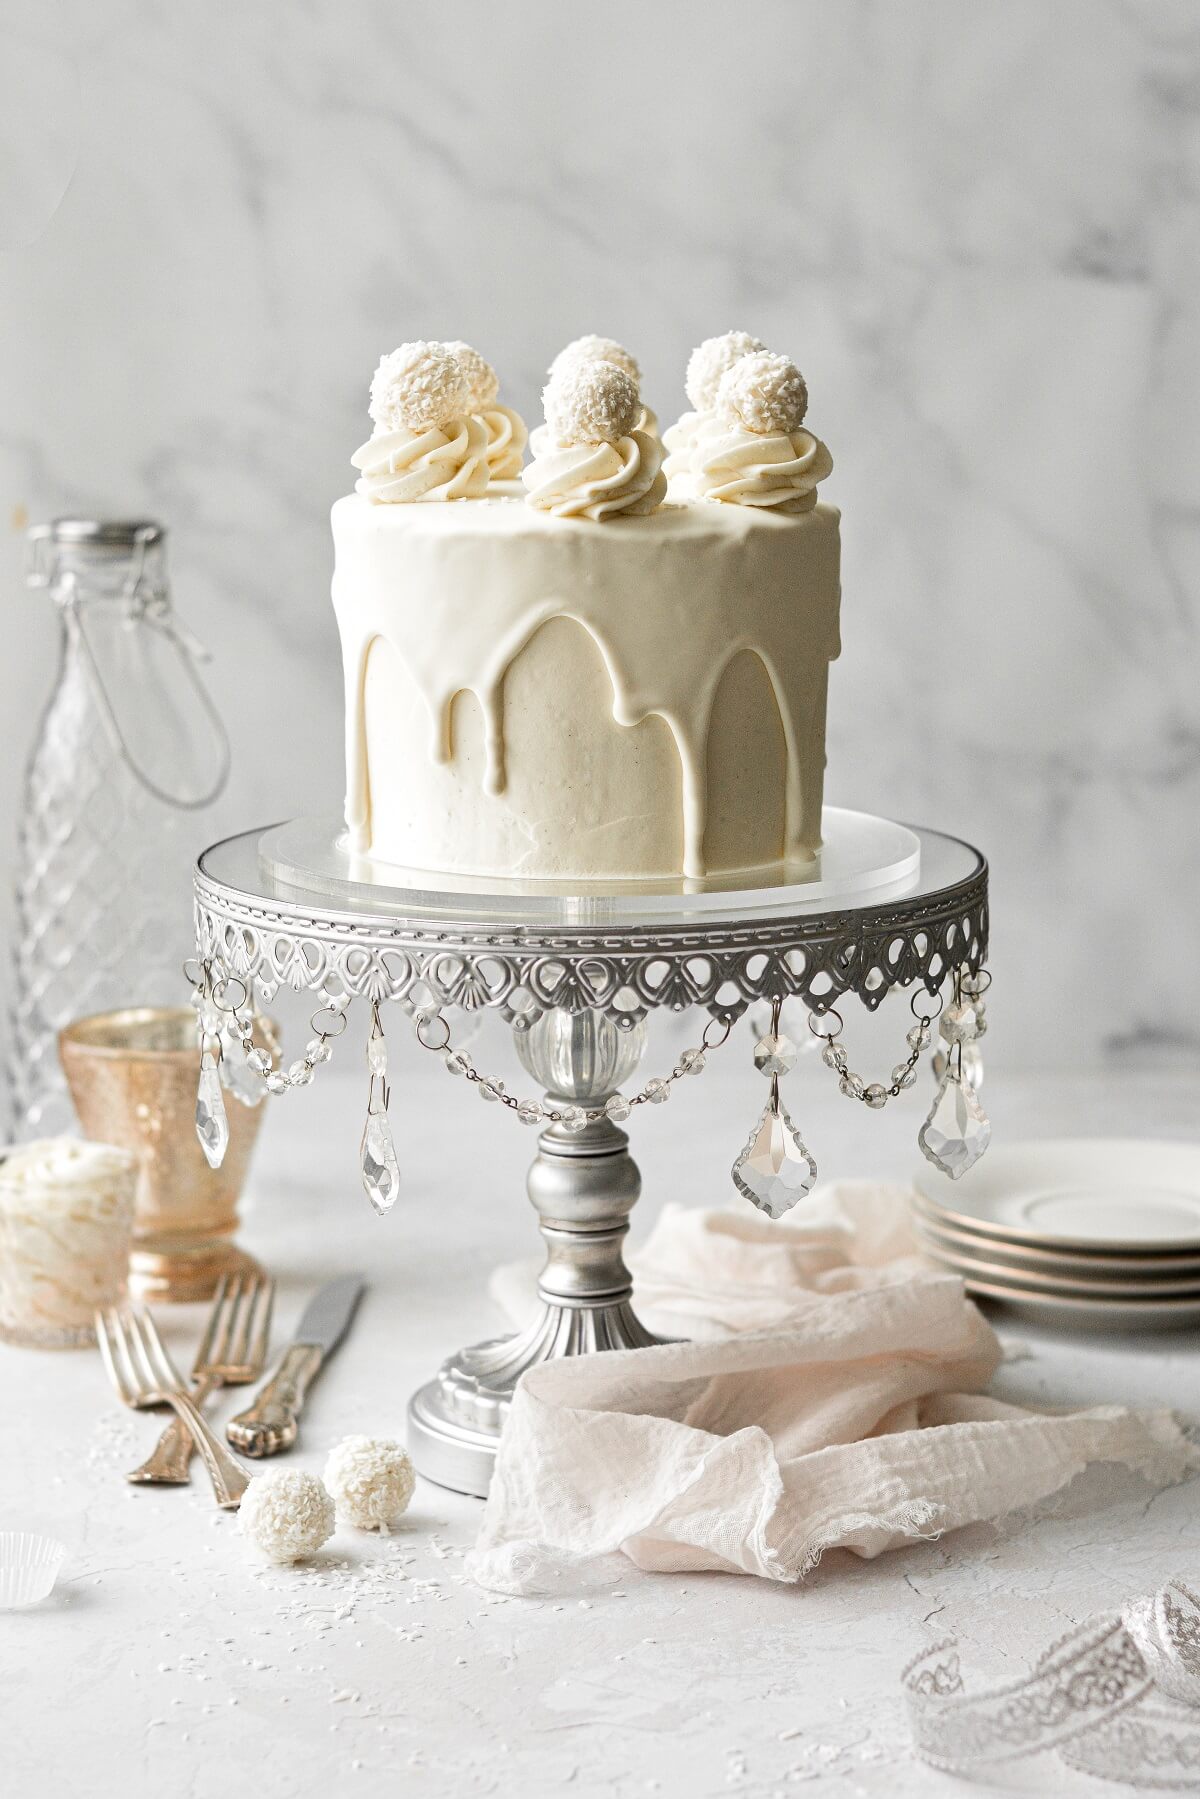 A white chocolate cake with drip and white chocolate truffles, on a silver mirrored cake stand.